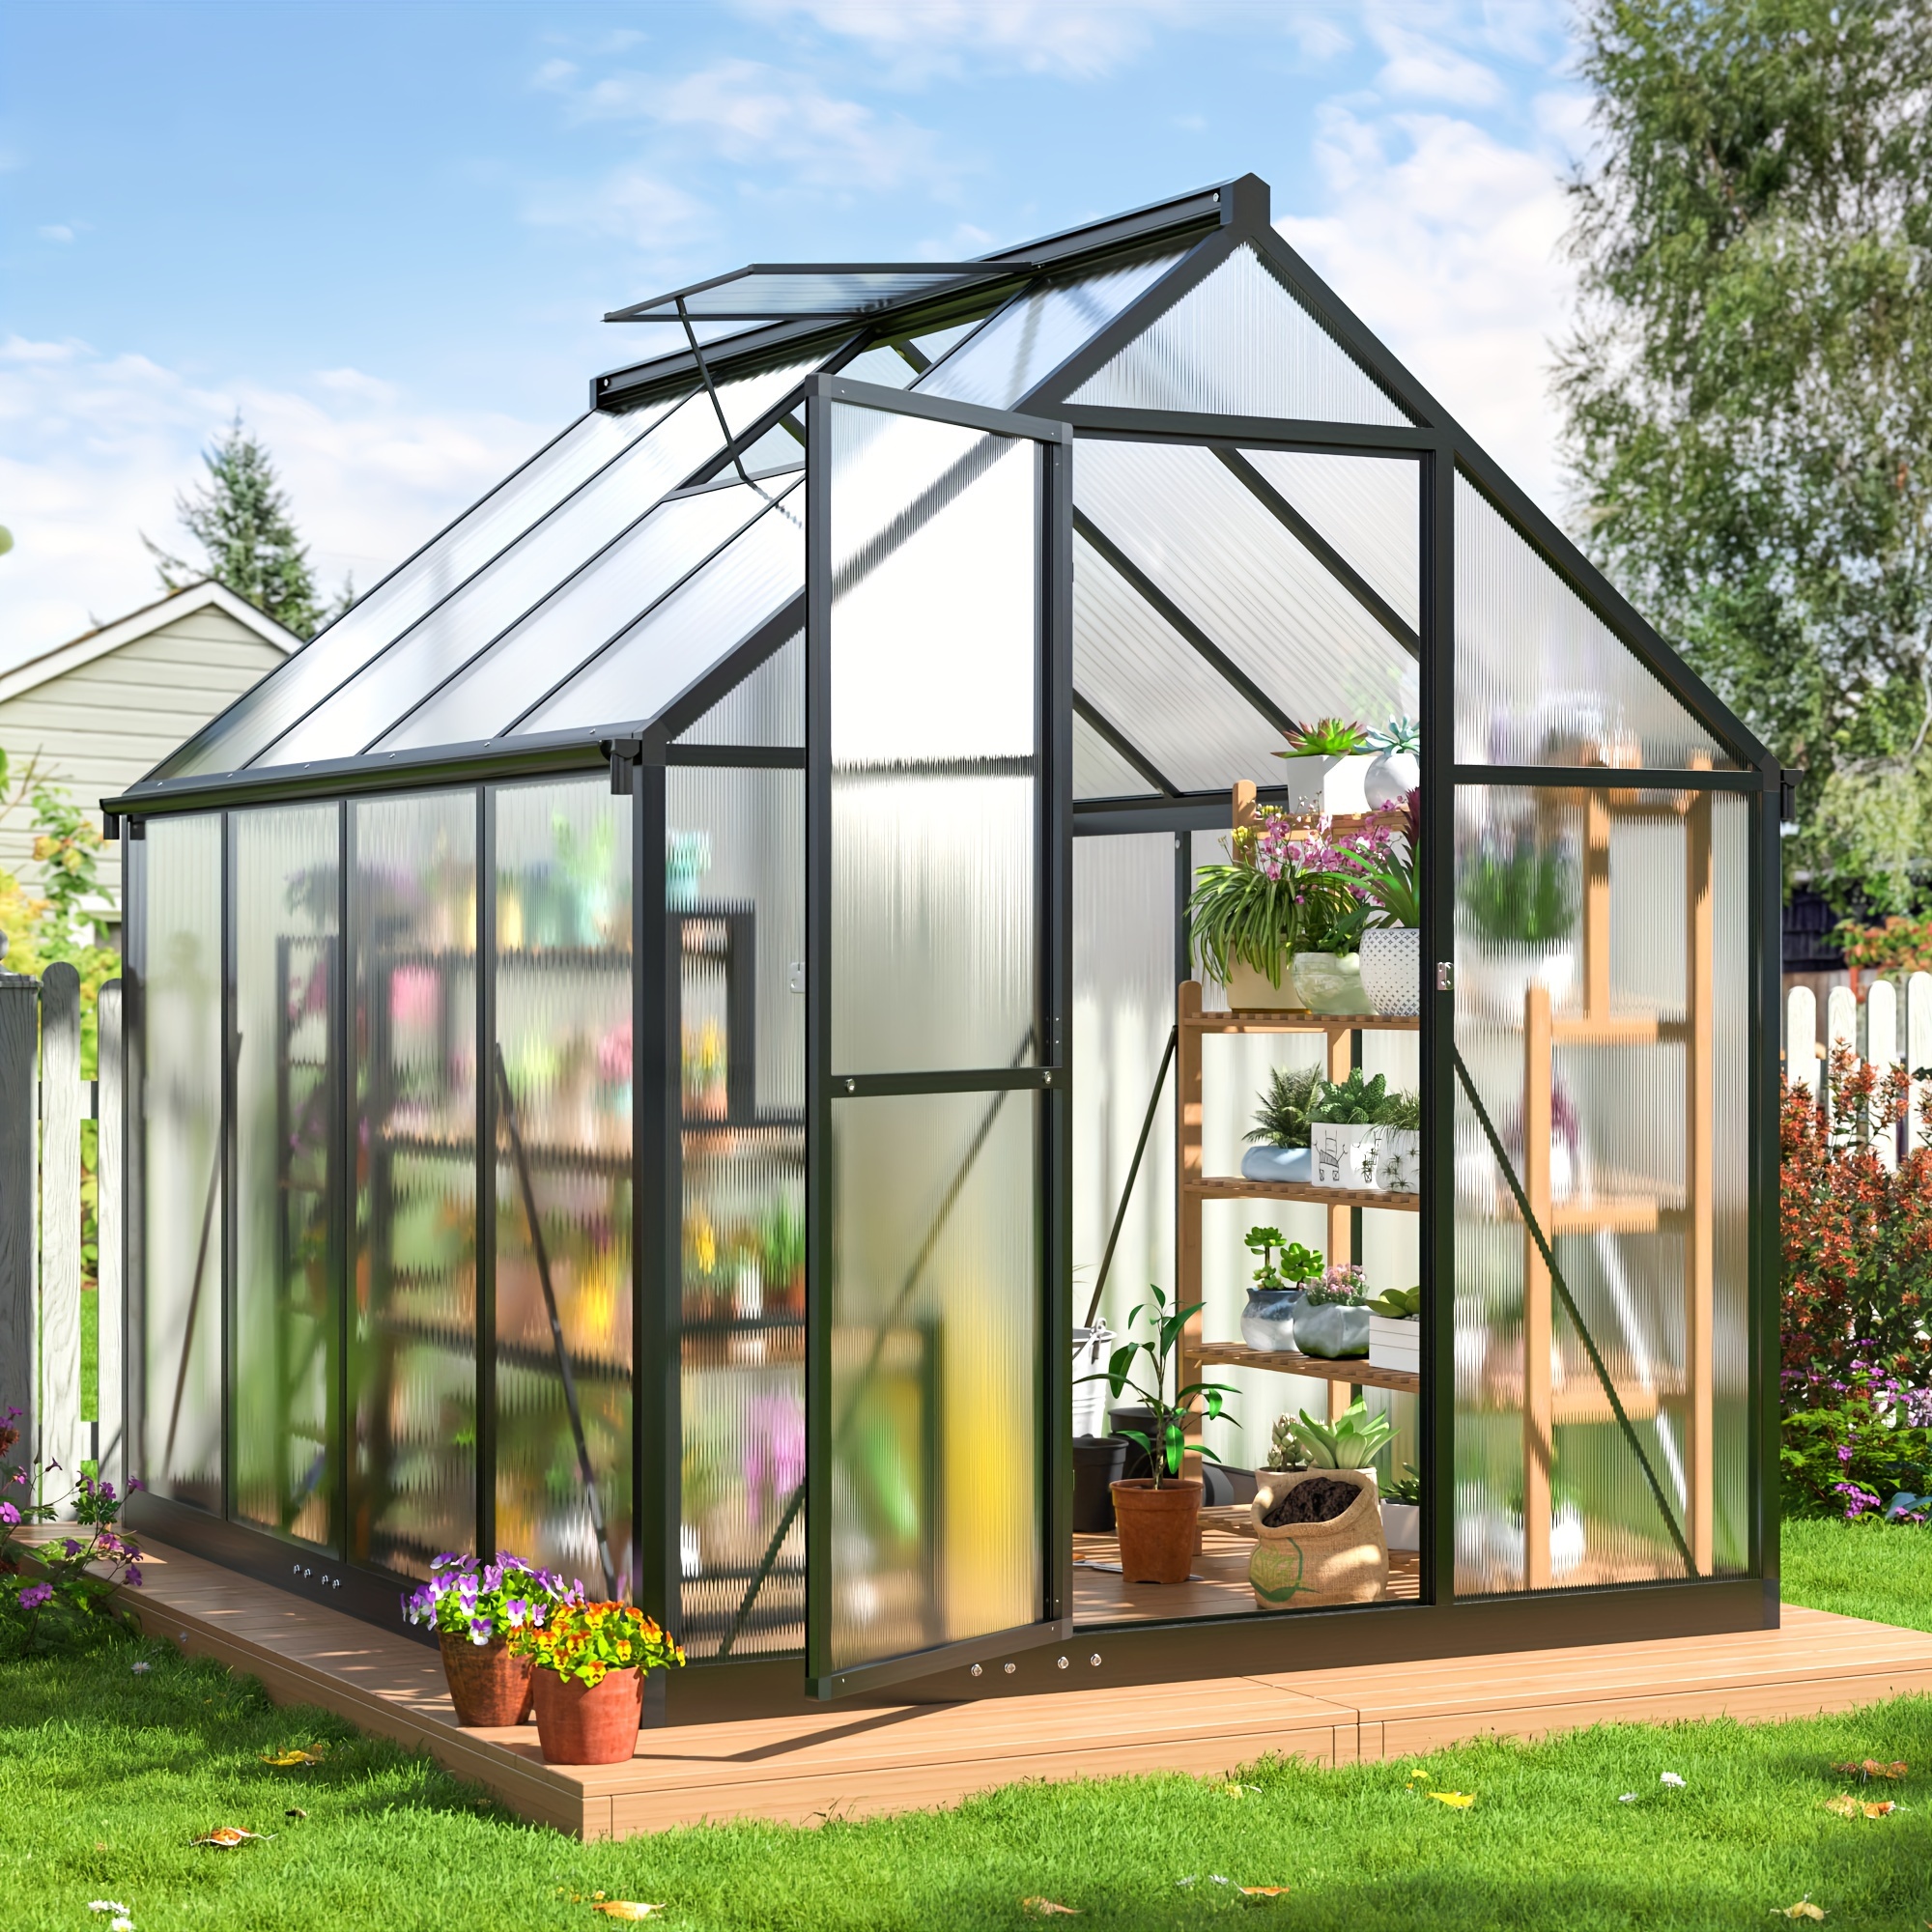 

6x7.5 Ft Greenhouse For Outdoors, Polycarbonate Greenhouse With Quick Setup Structure And Roof Vent, Aluminum Large Walk-in Greenhouse For Outside Garden Backyard, Black